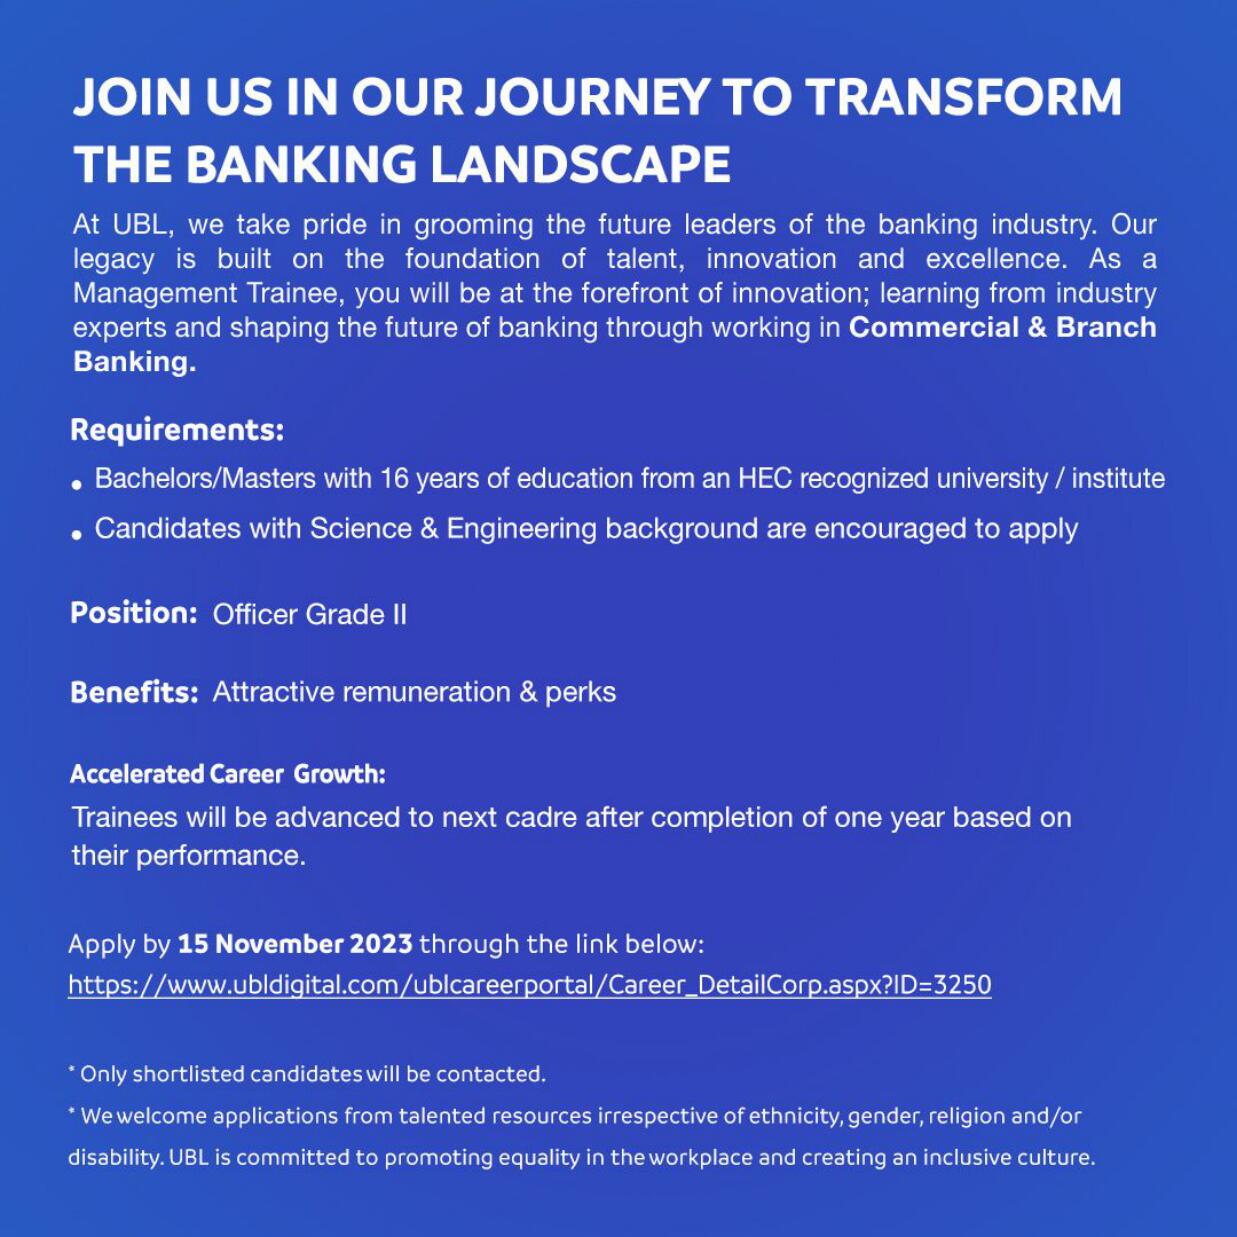 UBL U-Rise Management Trainee Program Shaping Future Leaders in Banking